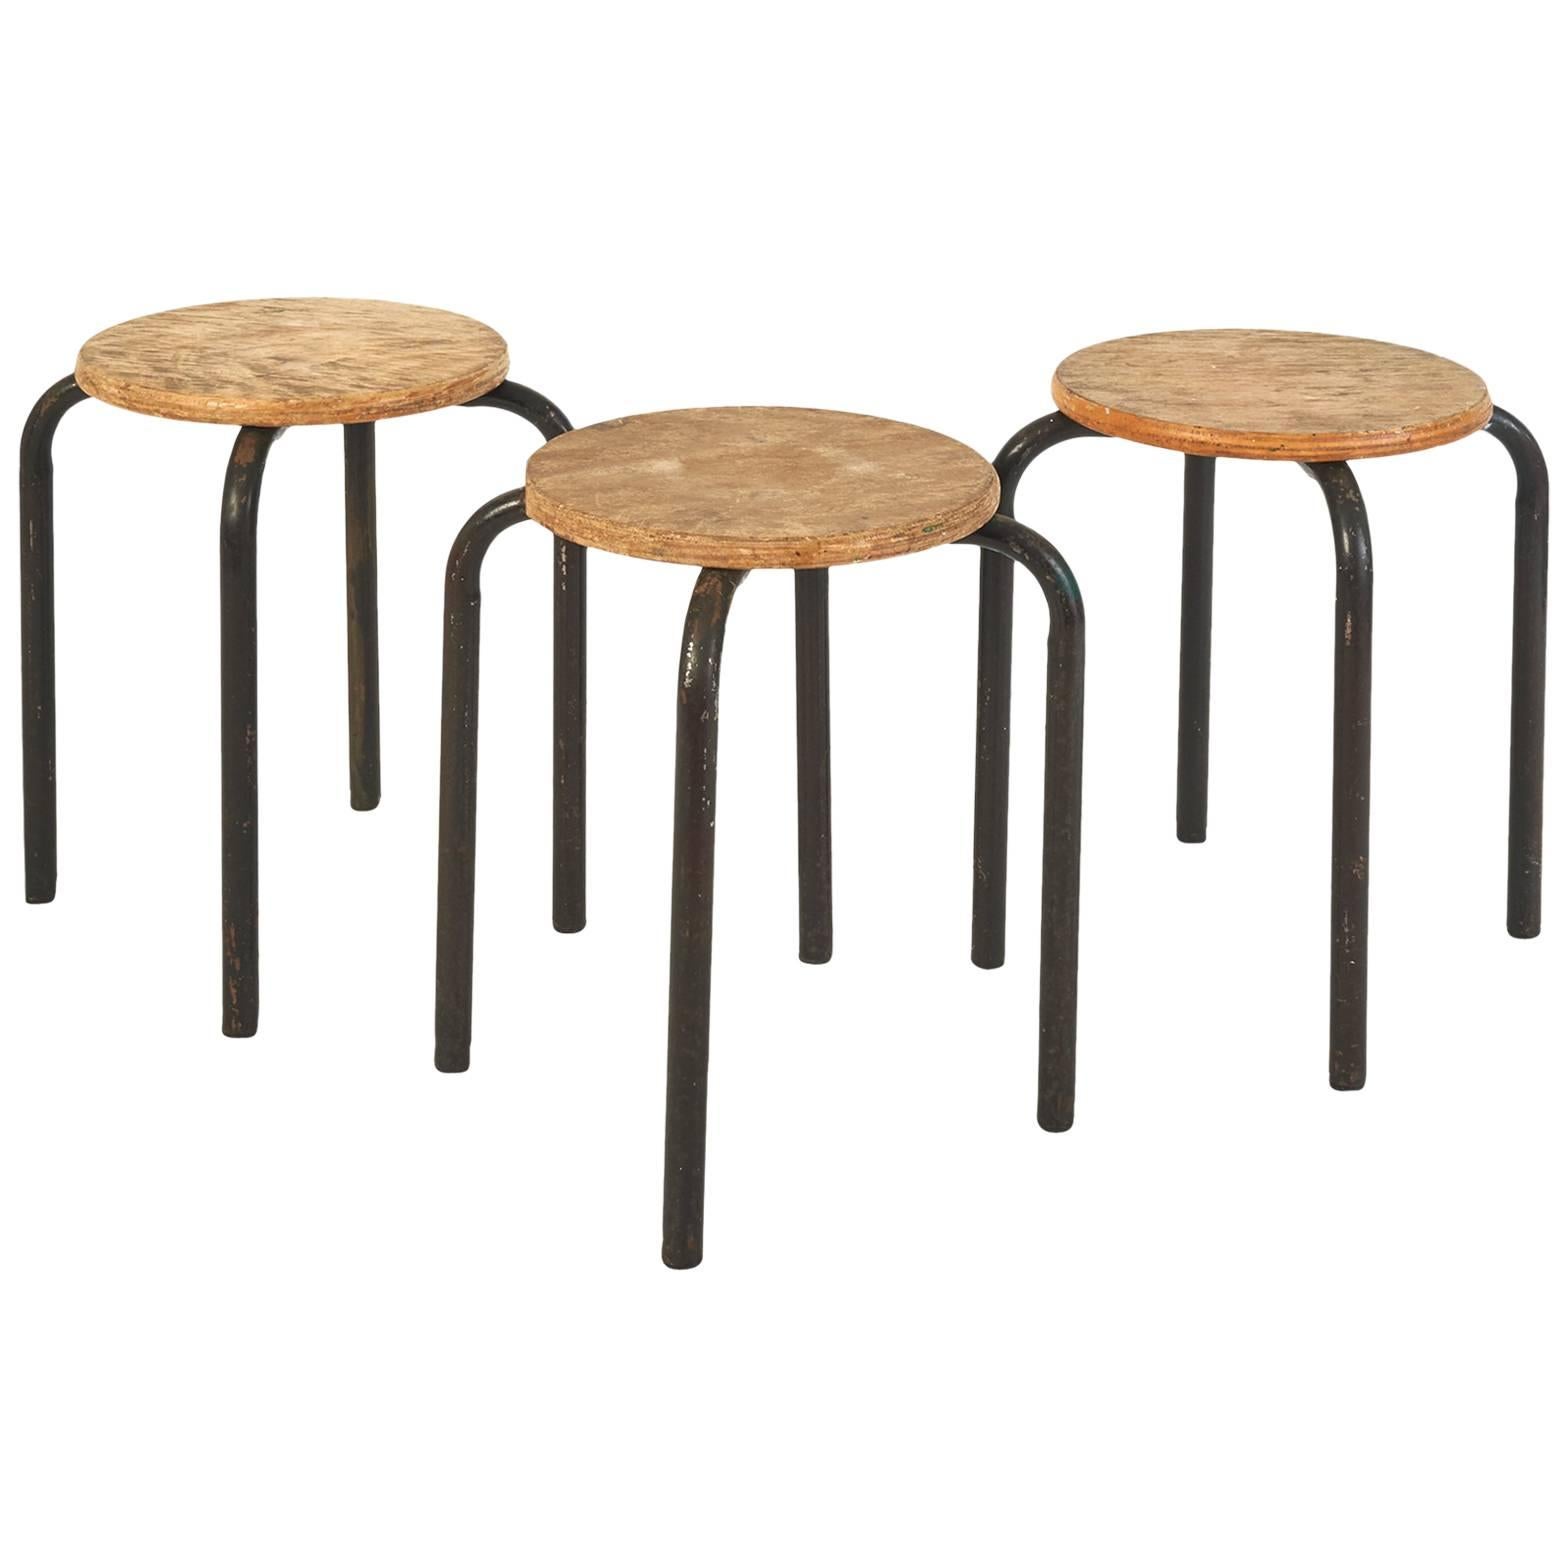 Set of Wood and Metal Painter Stools in the Style of Jean Prouvé, France 1950's